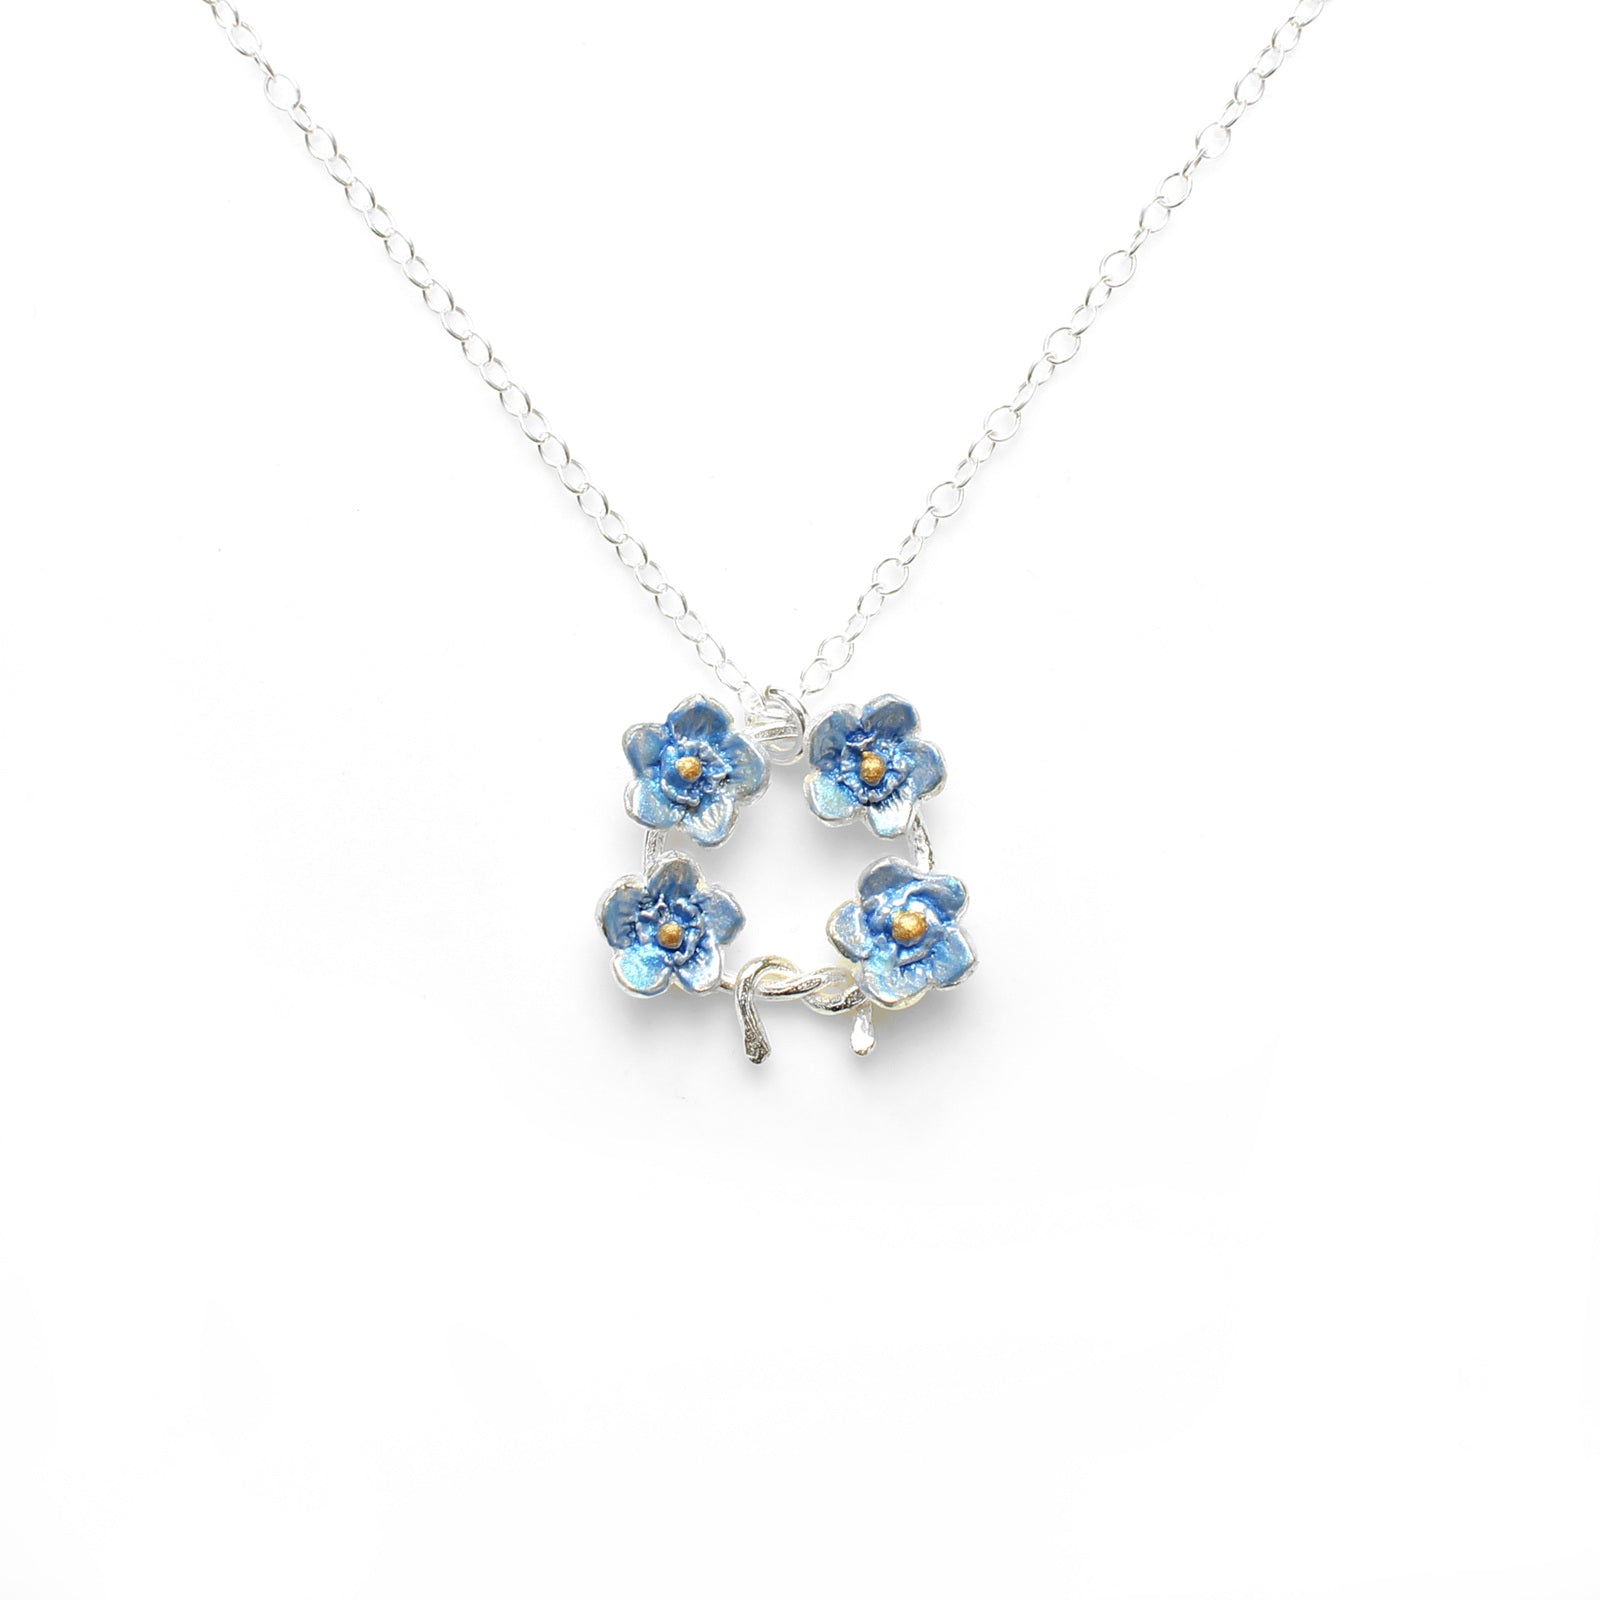 Forget Me Not Posey Necklace - Handpainted Silver